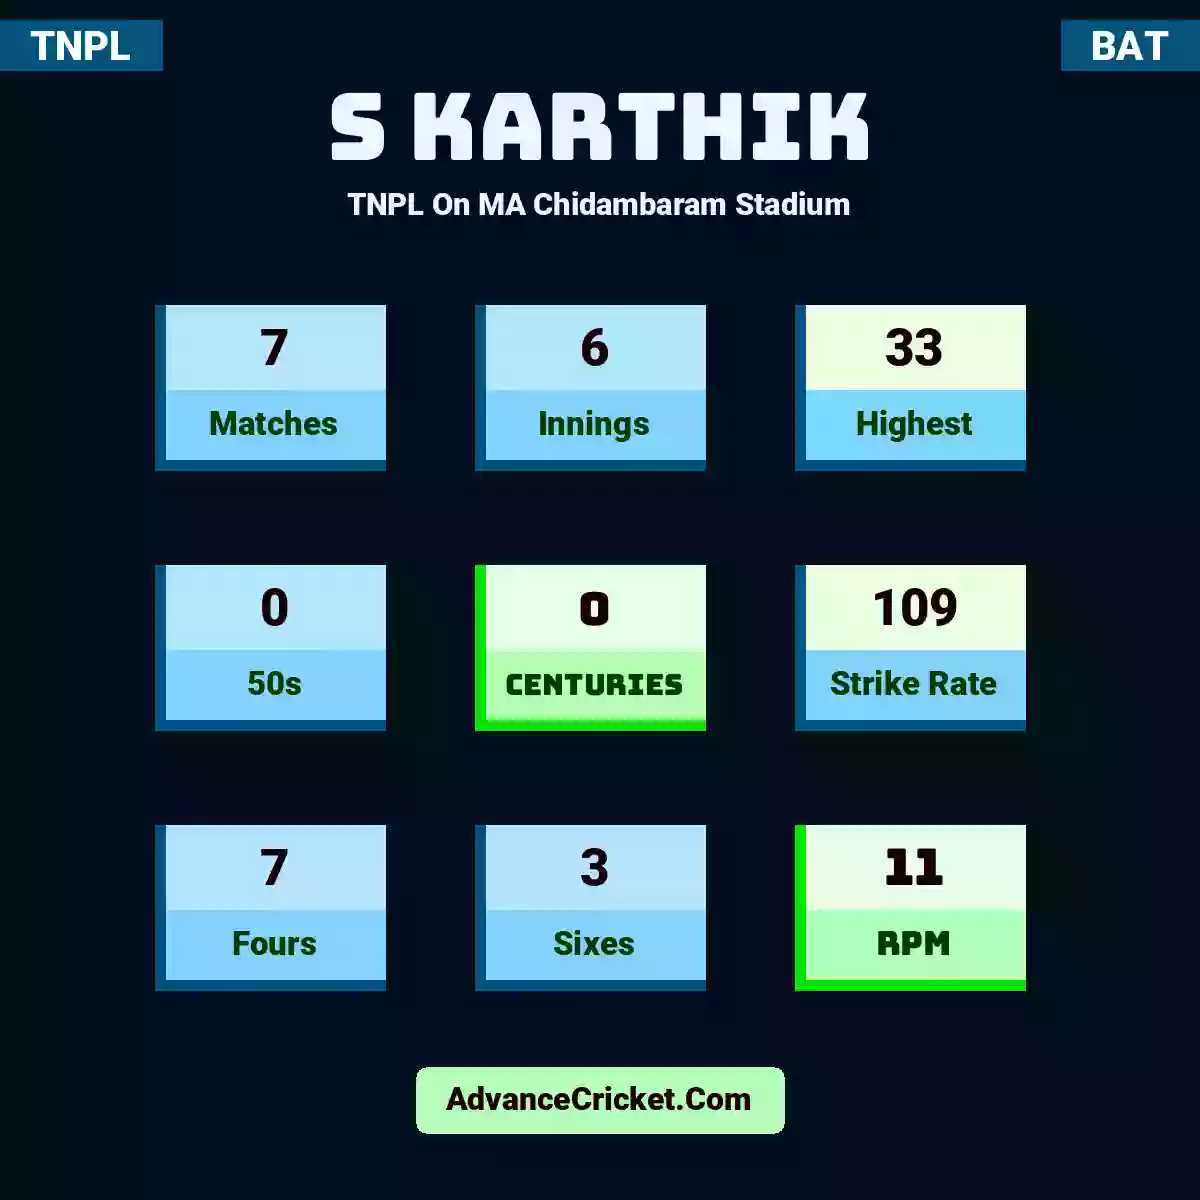 S Karthik TNPL  On MA Chidambaram Stadium, S Karthik played 7 matches, scored 33 runs as highest, 0 half-centuries, and 0 centuries, with a strike rate of 109. S.Karthik hit 7 fours and 3 sixes, with an RPM of 11.